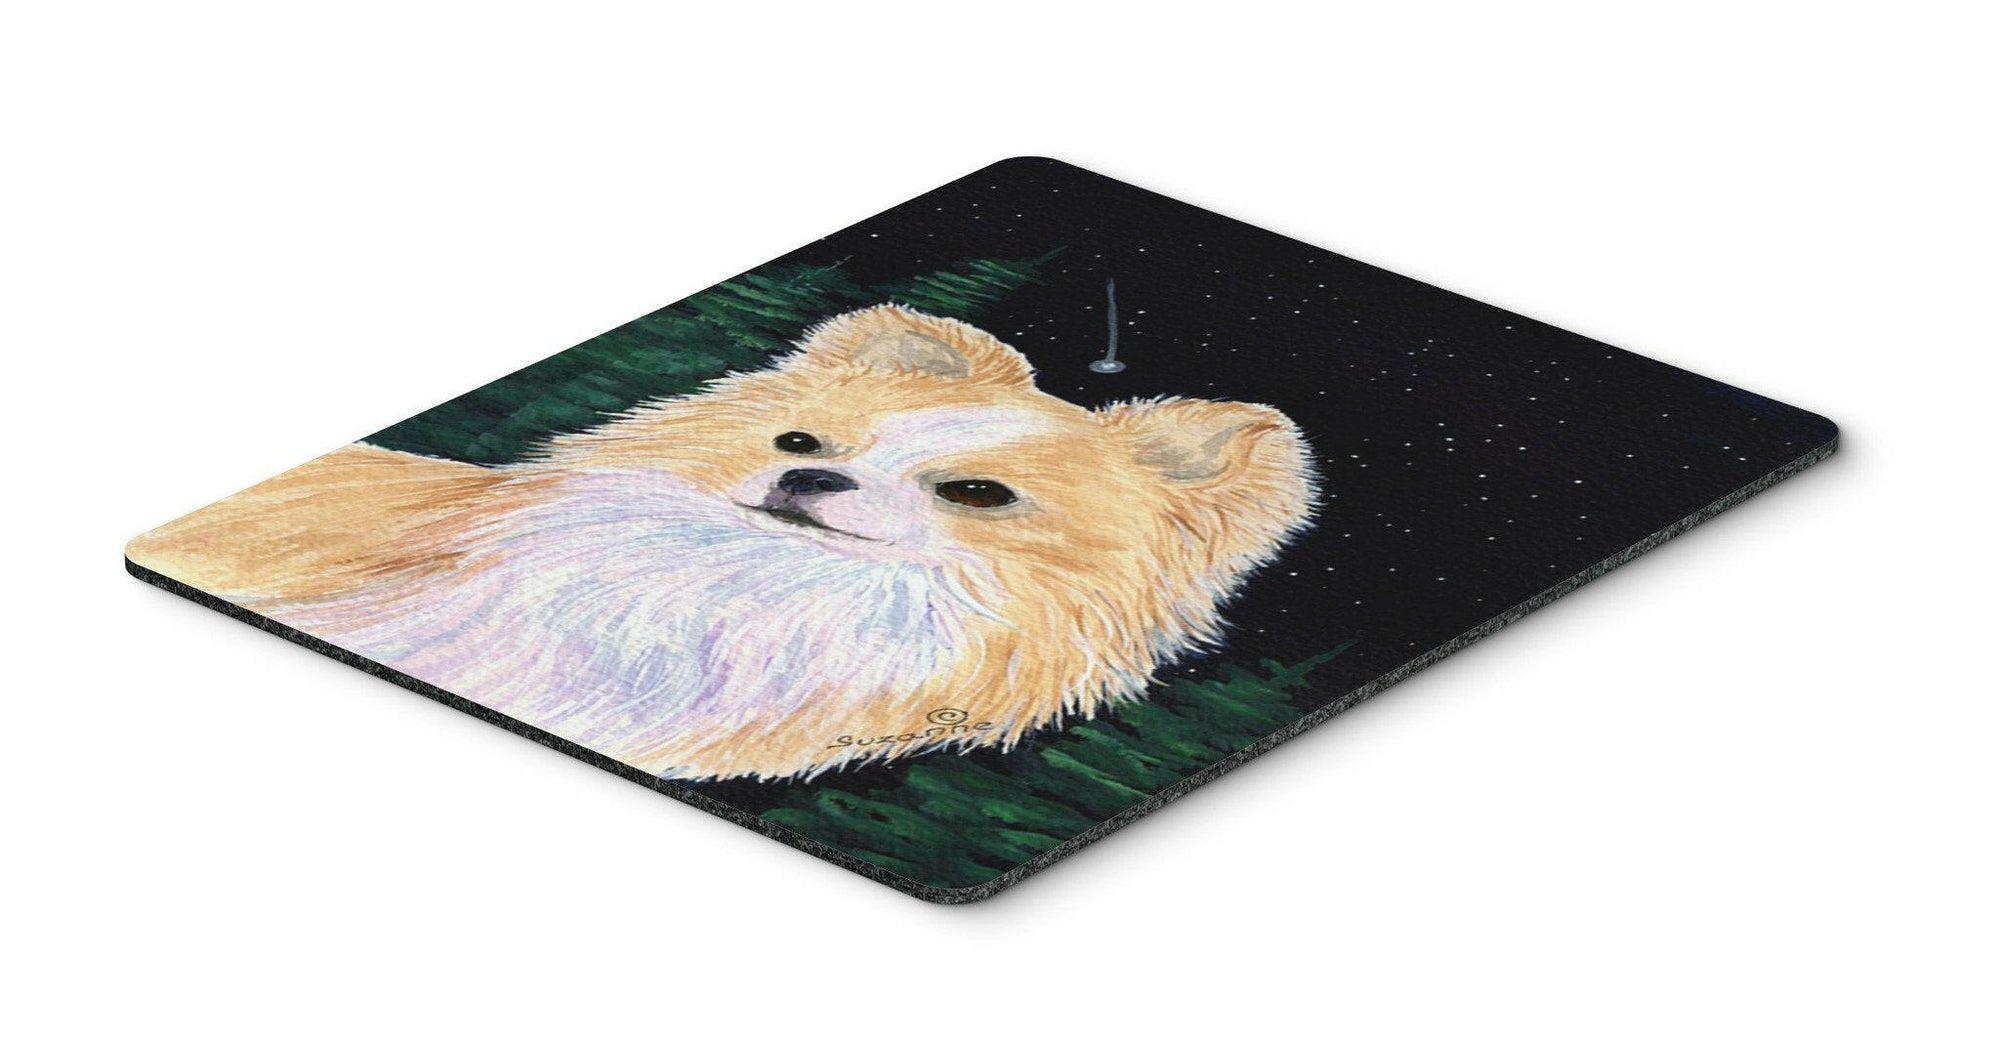 Starry Night Chihuahua Mouse Pad / Hot Pad / Trivet by Caroline's Treasures